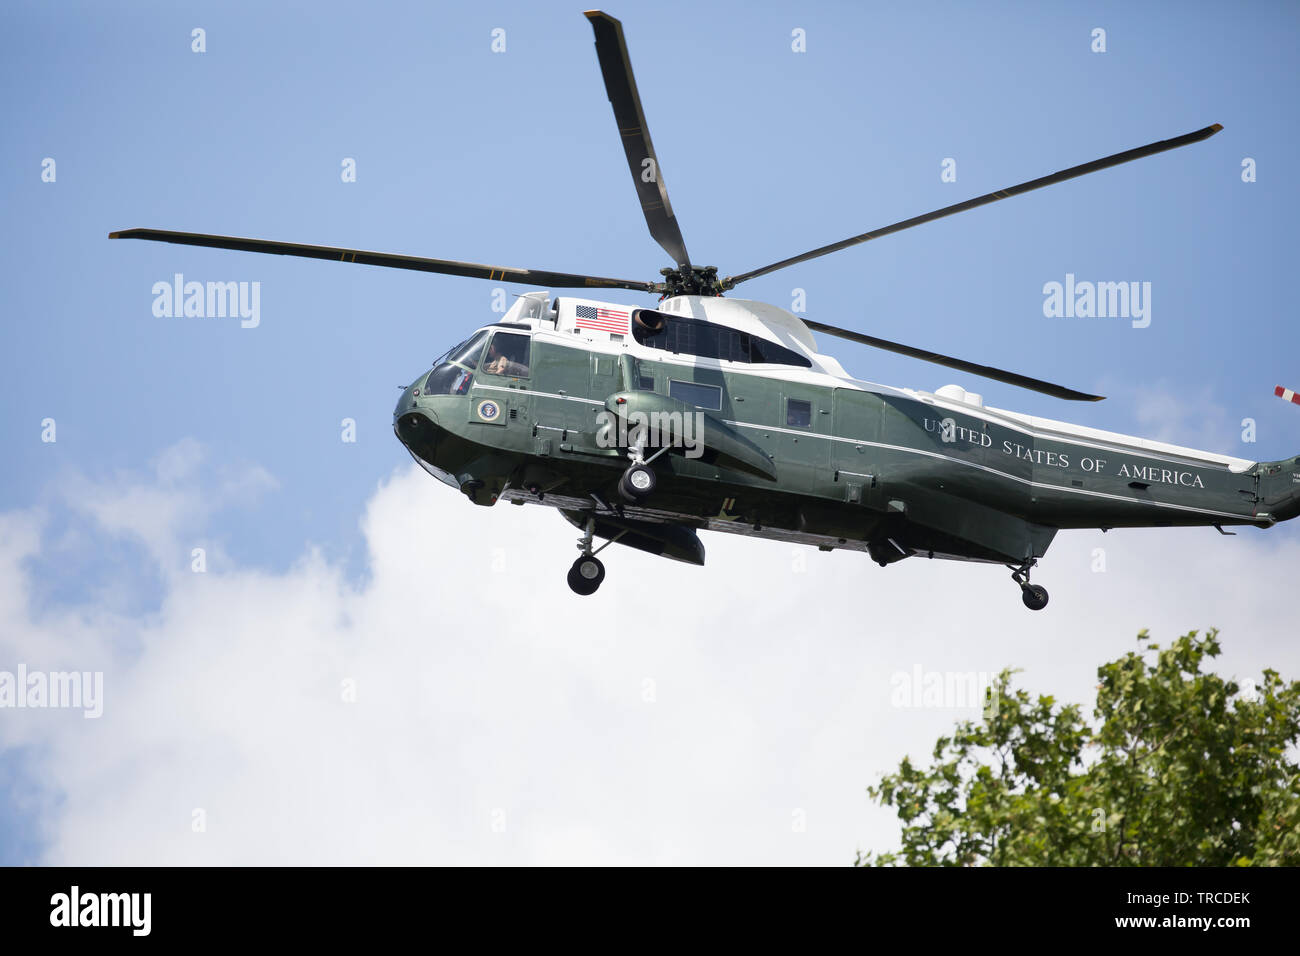 London, UK. 3rd June, 2019. President Trump and his wife Melania arrive at Buckingham Palace by Helicopter, Marine One, they were greeted by Prince Charles then The Queen at the start of his official state visit to Great Britain. A 21 gun salute was also carried out in his honour. Credit: Keith Larby/Alamy Live News Stock Photo